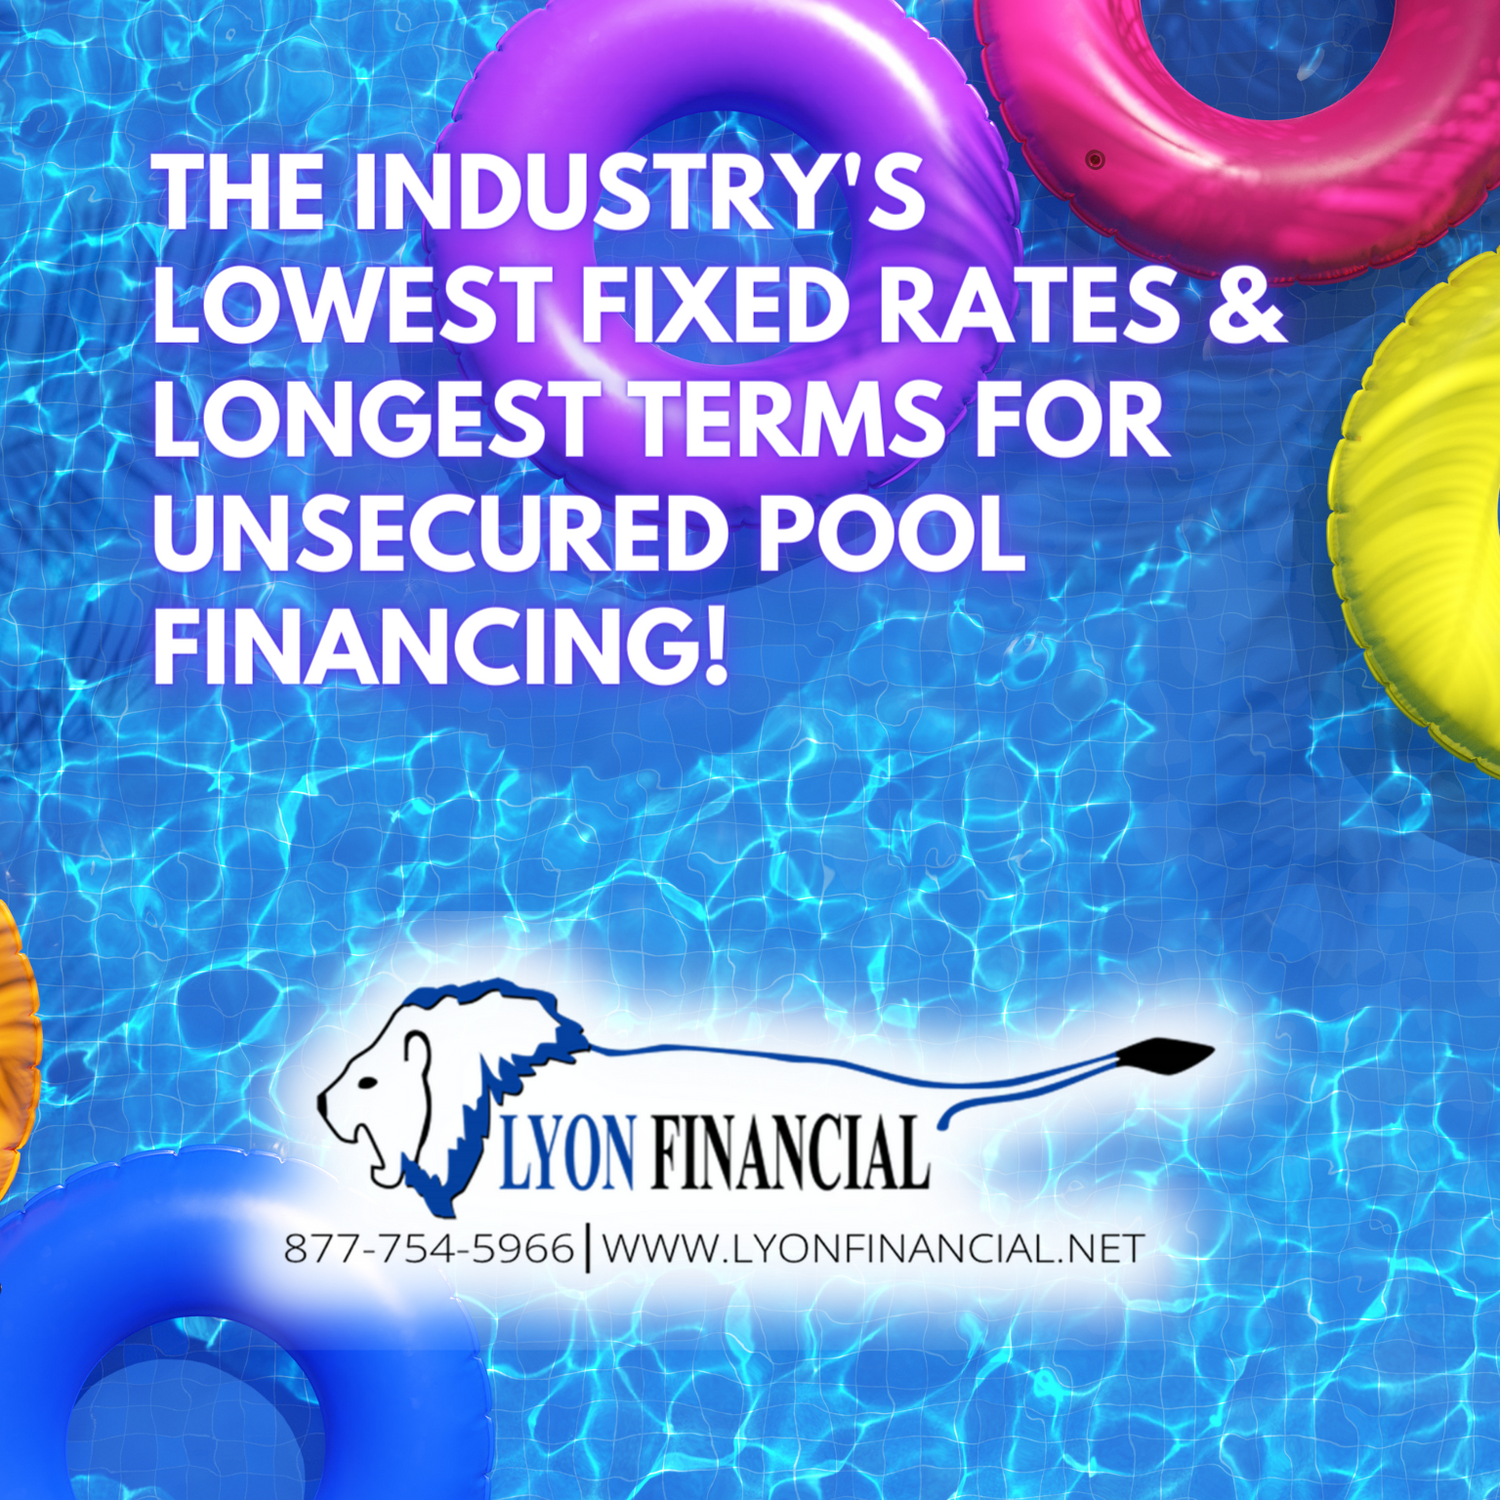 How Much Does a Pool Cost in Venice, Nokomis, Osprey, Sarasota, Englewood or North Port?